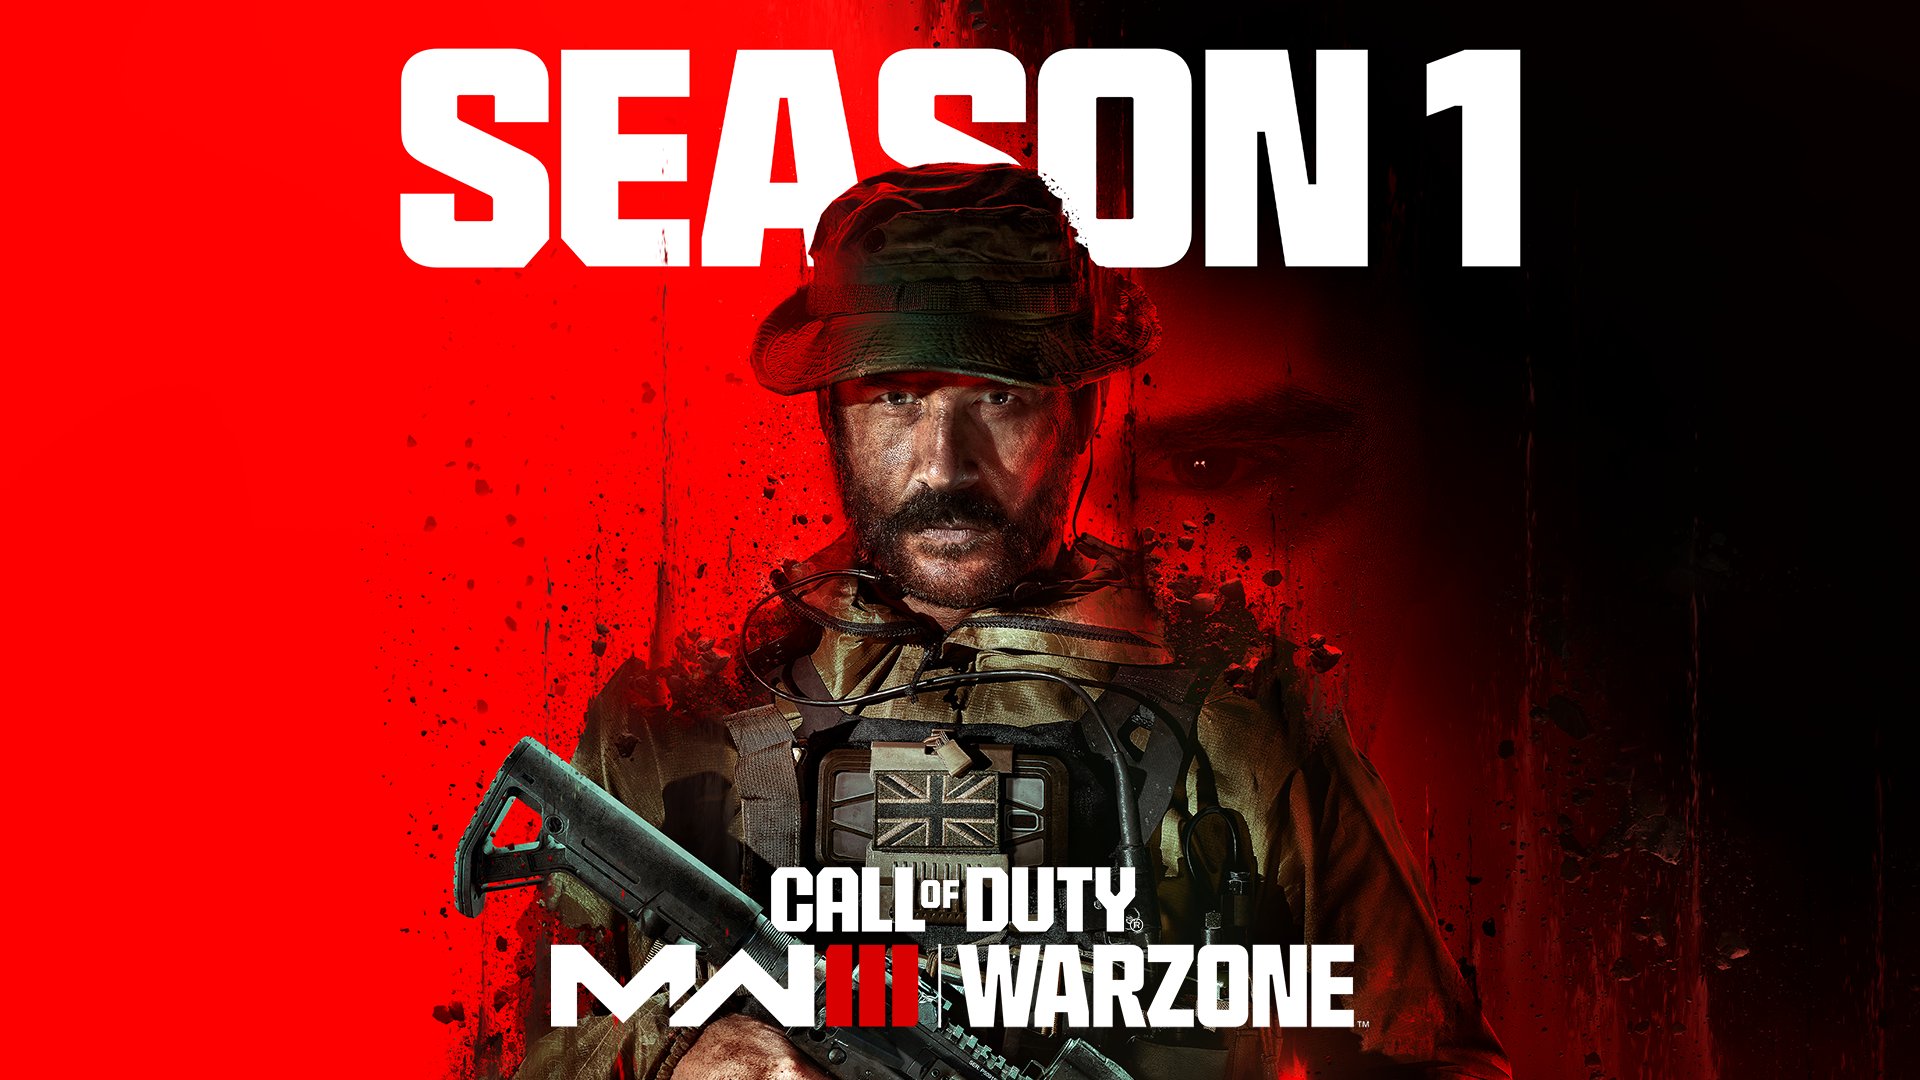 Warzone 3 pre-download, how to install the game in advance?